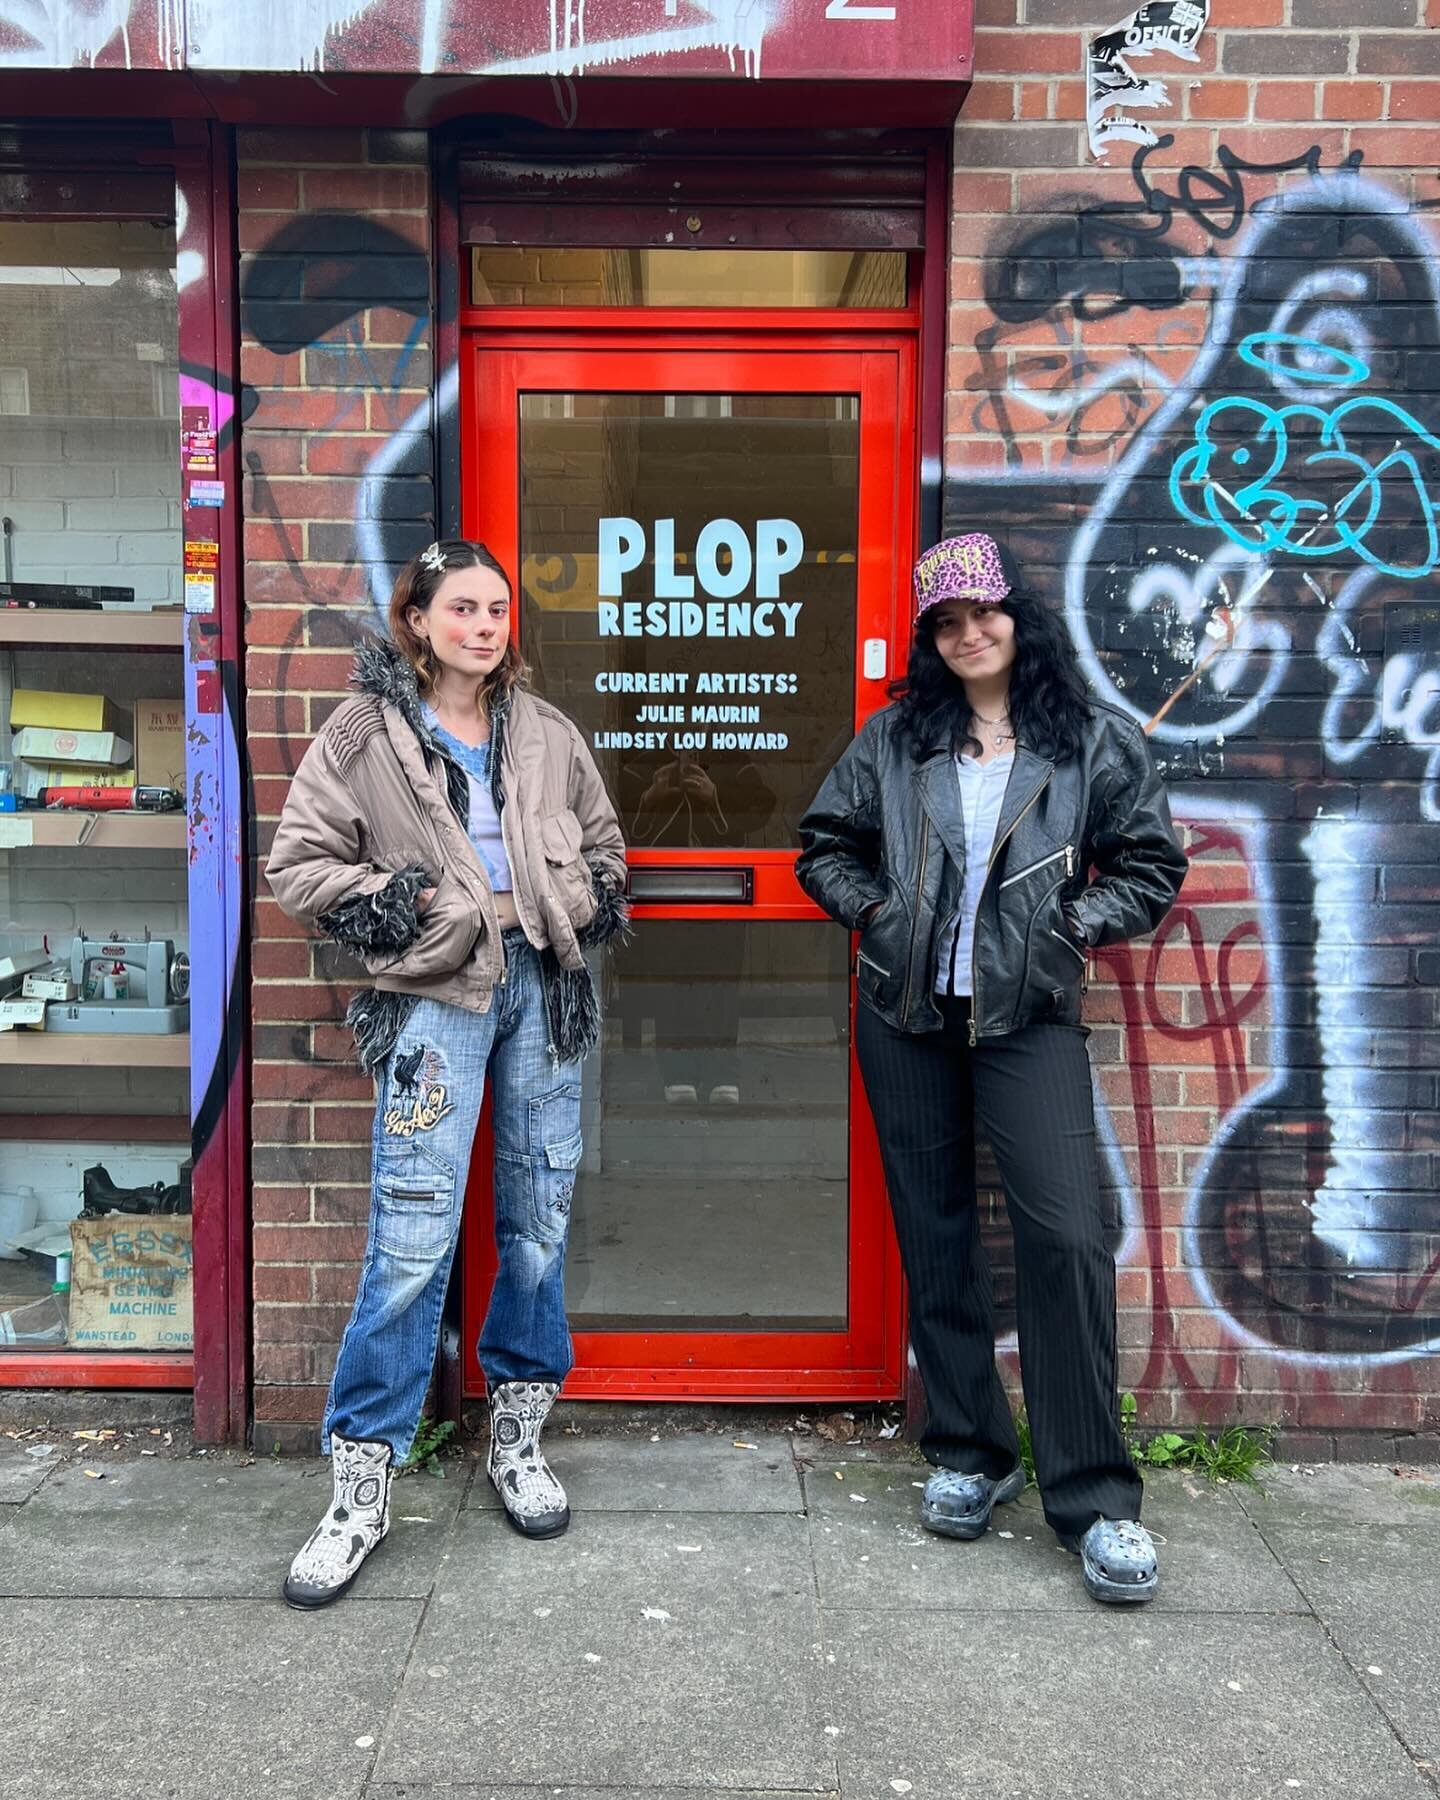 A snowy welcome to @lindseylouhoward and @me7usa as our December PLOP Residents! 💥

#plopresidency #artistresidency #artistinresidence #residency #plop #artist #londonresidency #plop #contemporarysculpture